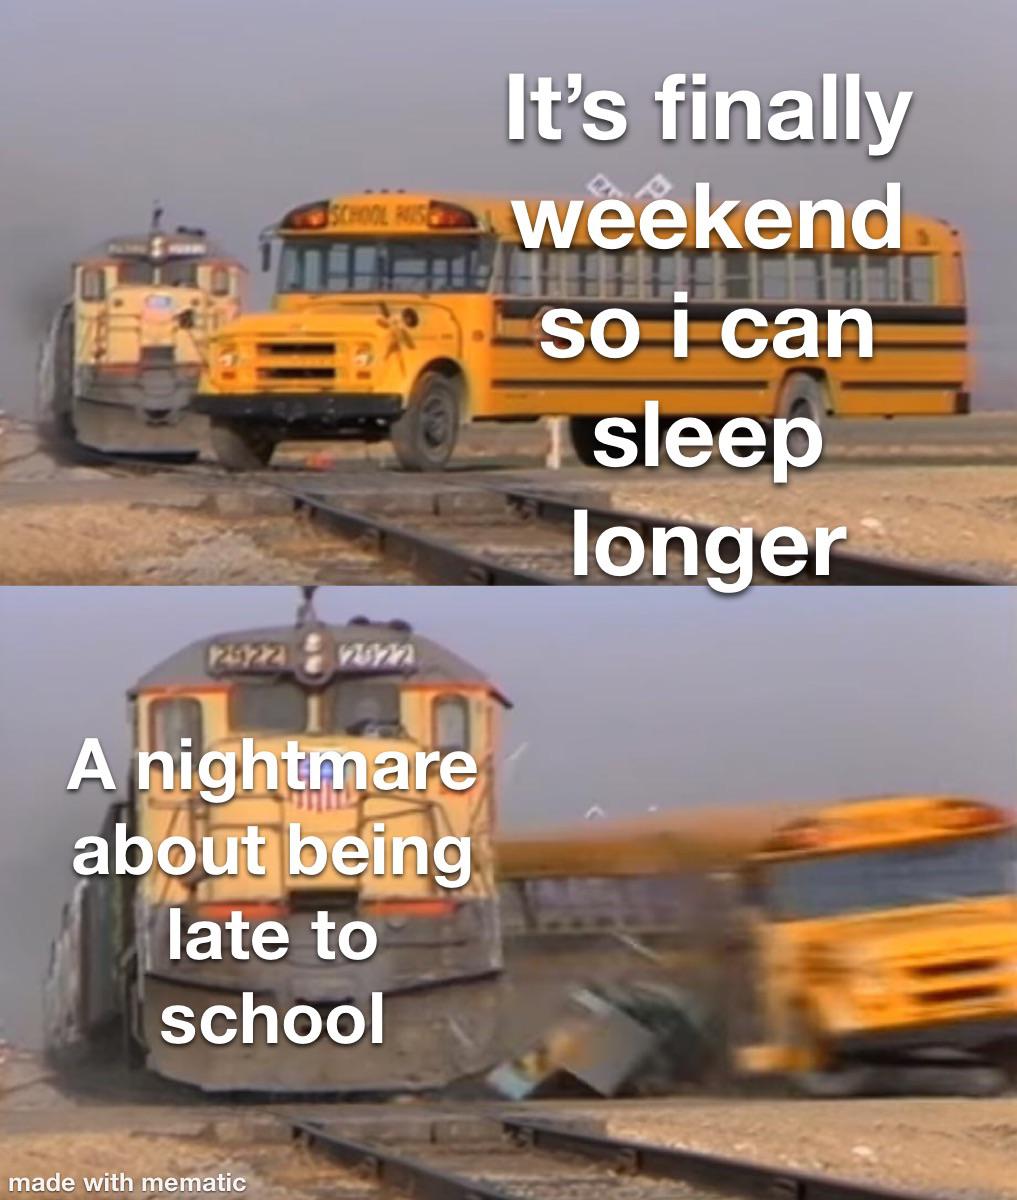 came here to fap not to feel - Jschool Rise It's finally weekend so i can sleep longer A nightmare about being late to school made with mematic